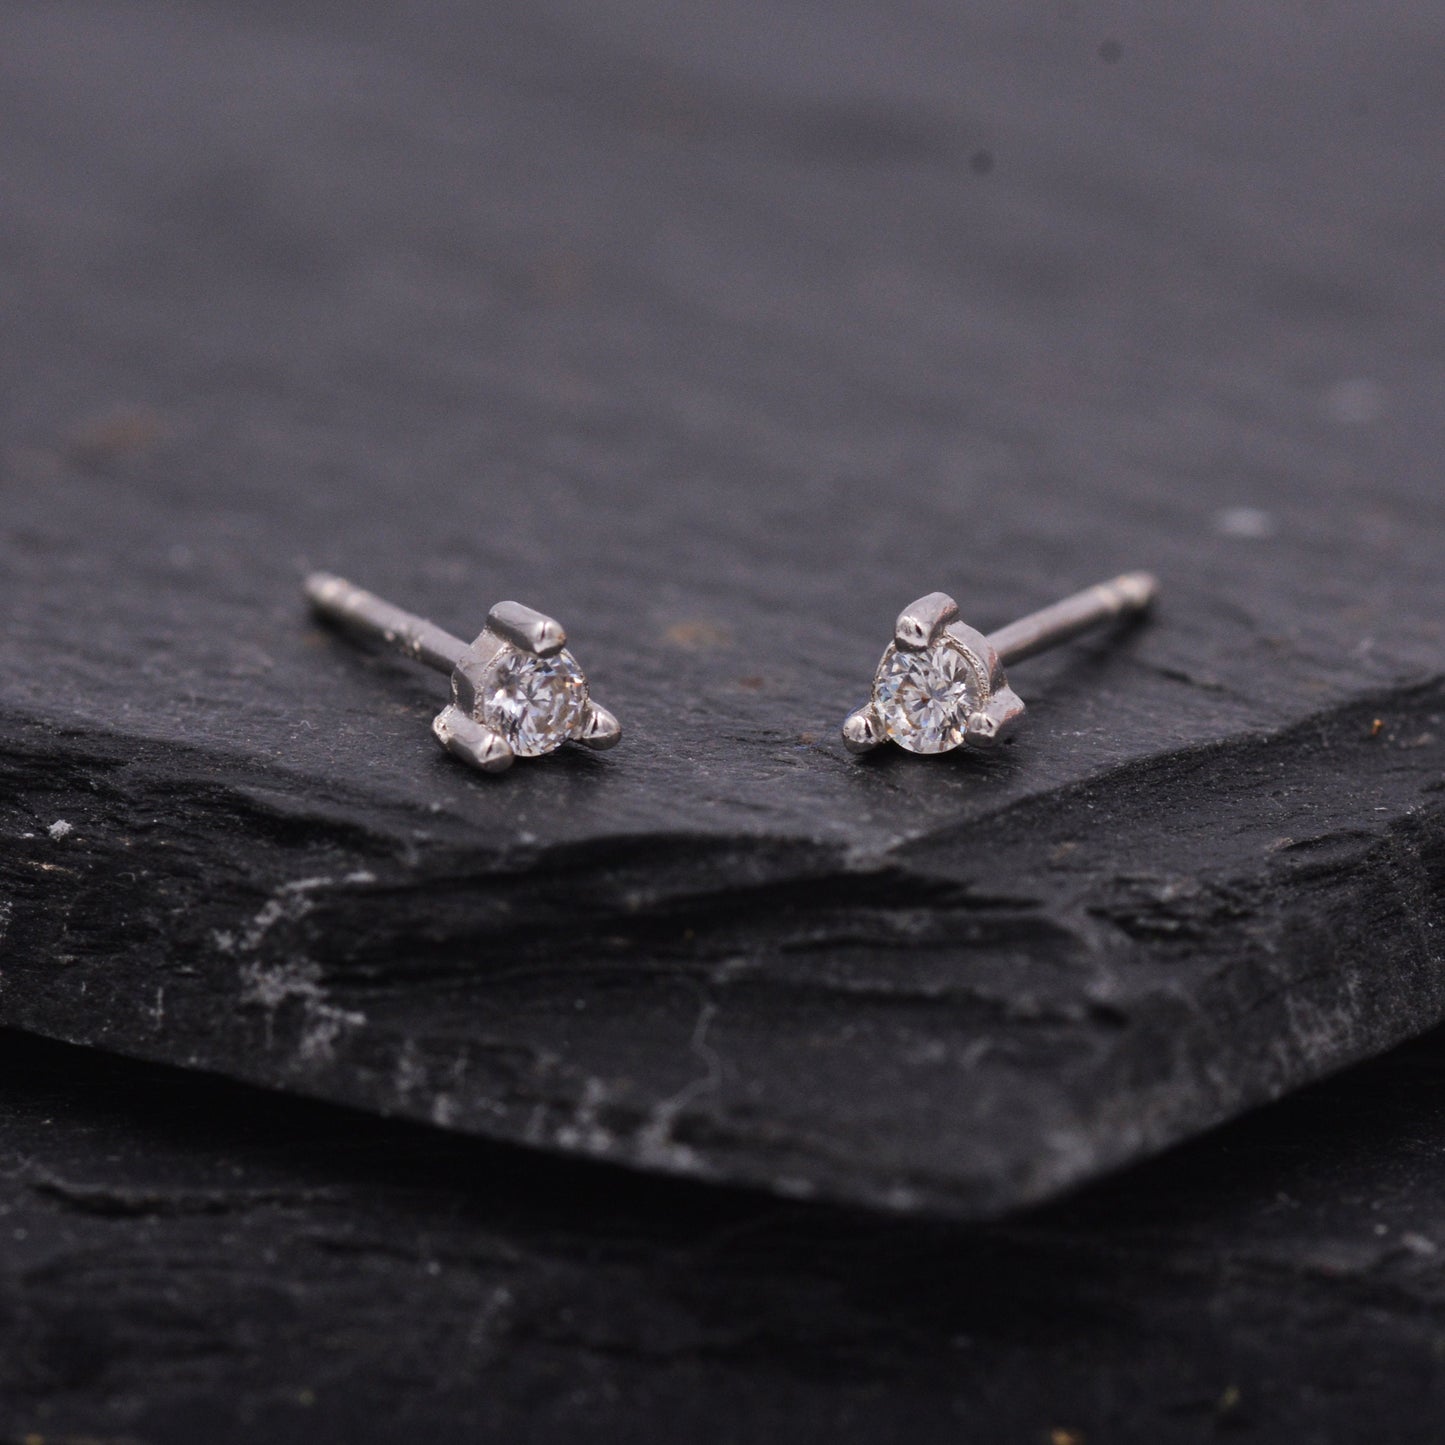 Sterling Silver Tiny Little Stud Earrings, Barely Visible, Extra Small CZ Stud, Cubic Zirconia Crystal Claw Earrings, Three Prong Stud